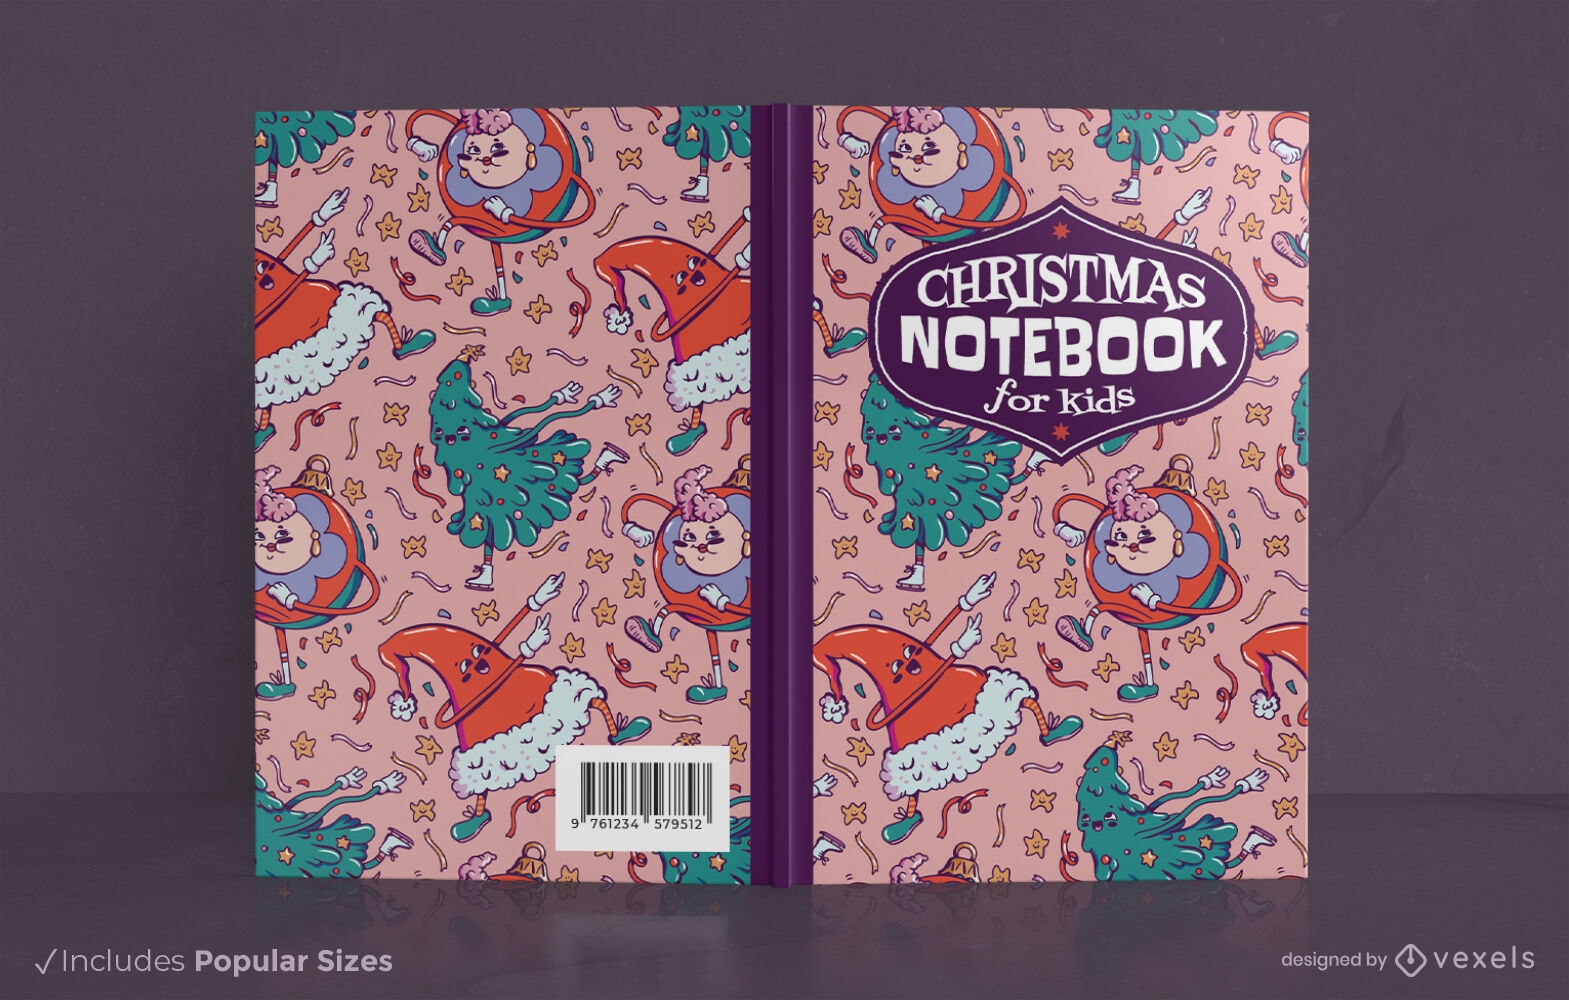 Christmas notebook for kids book cover design